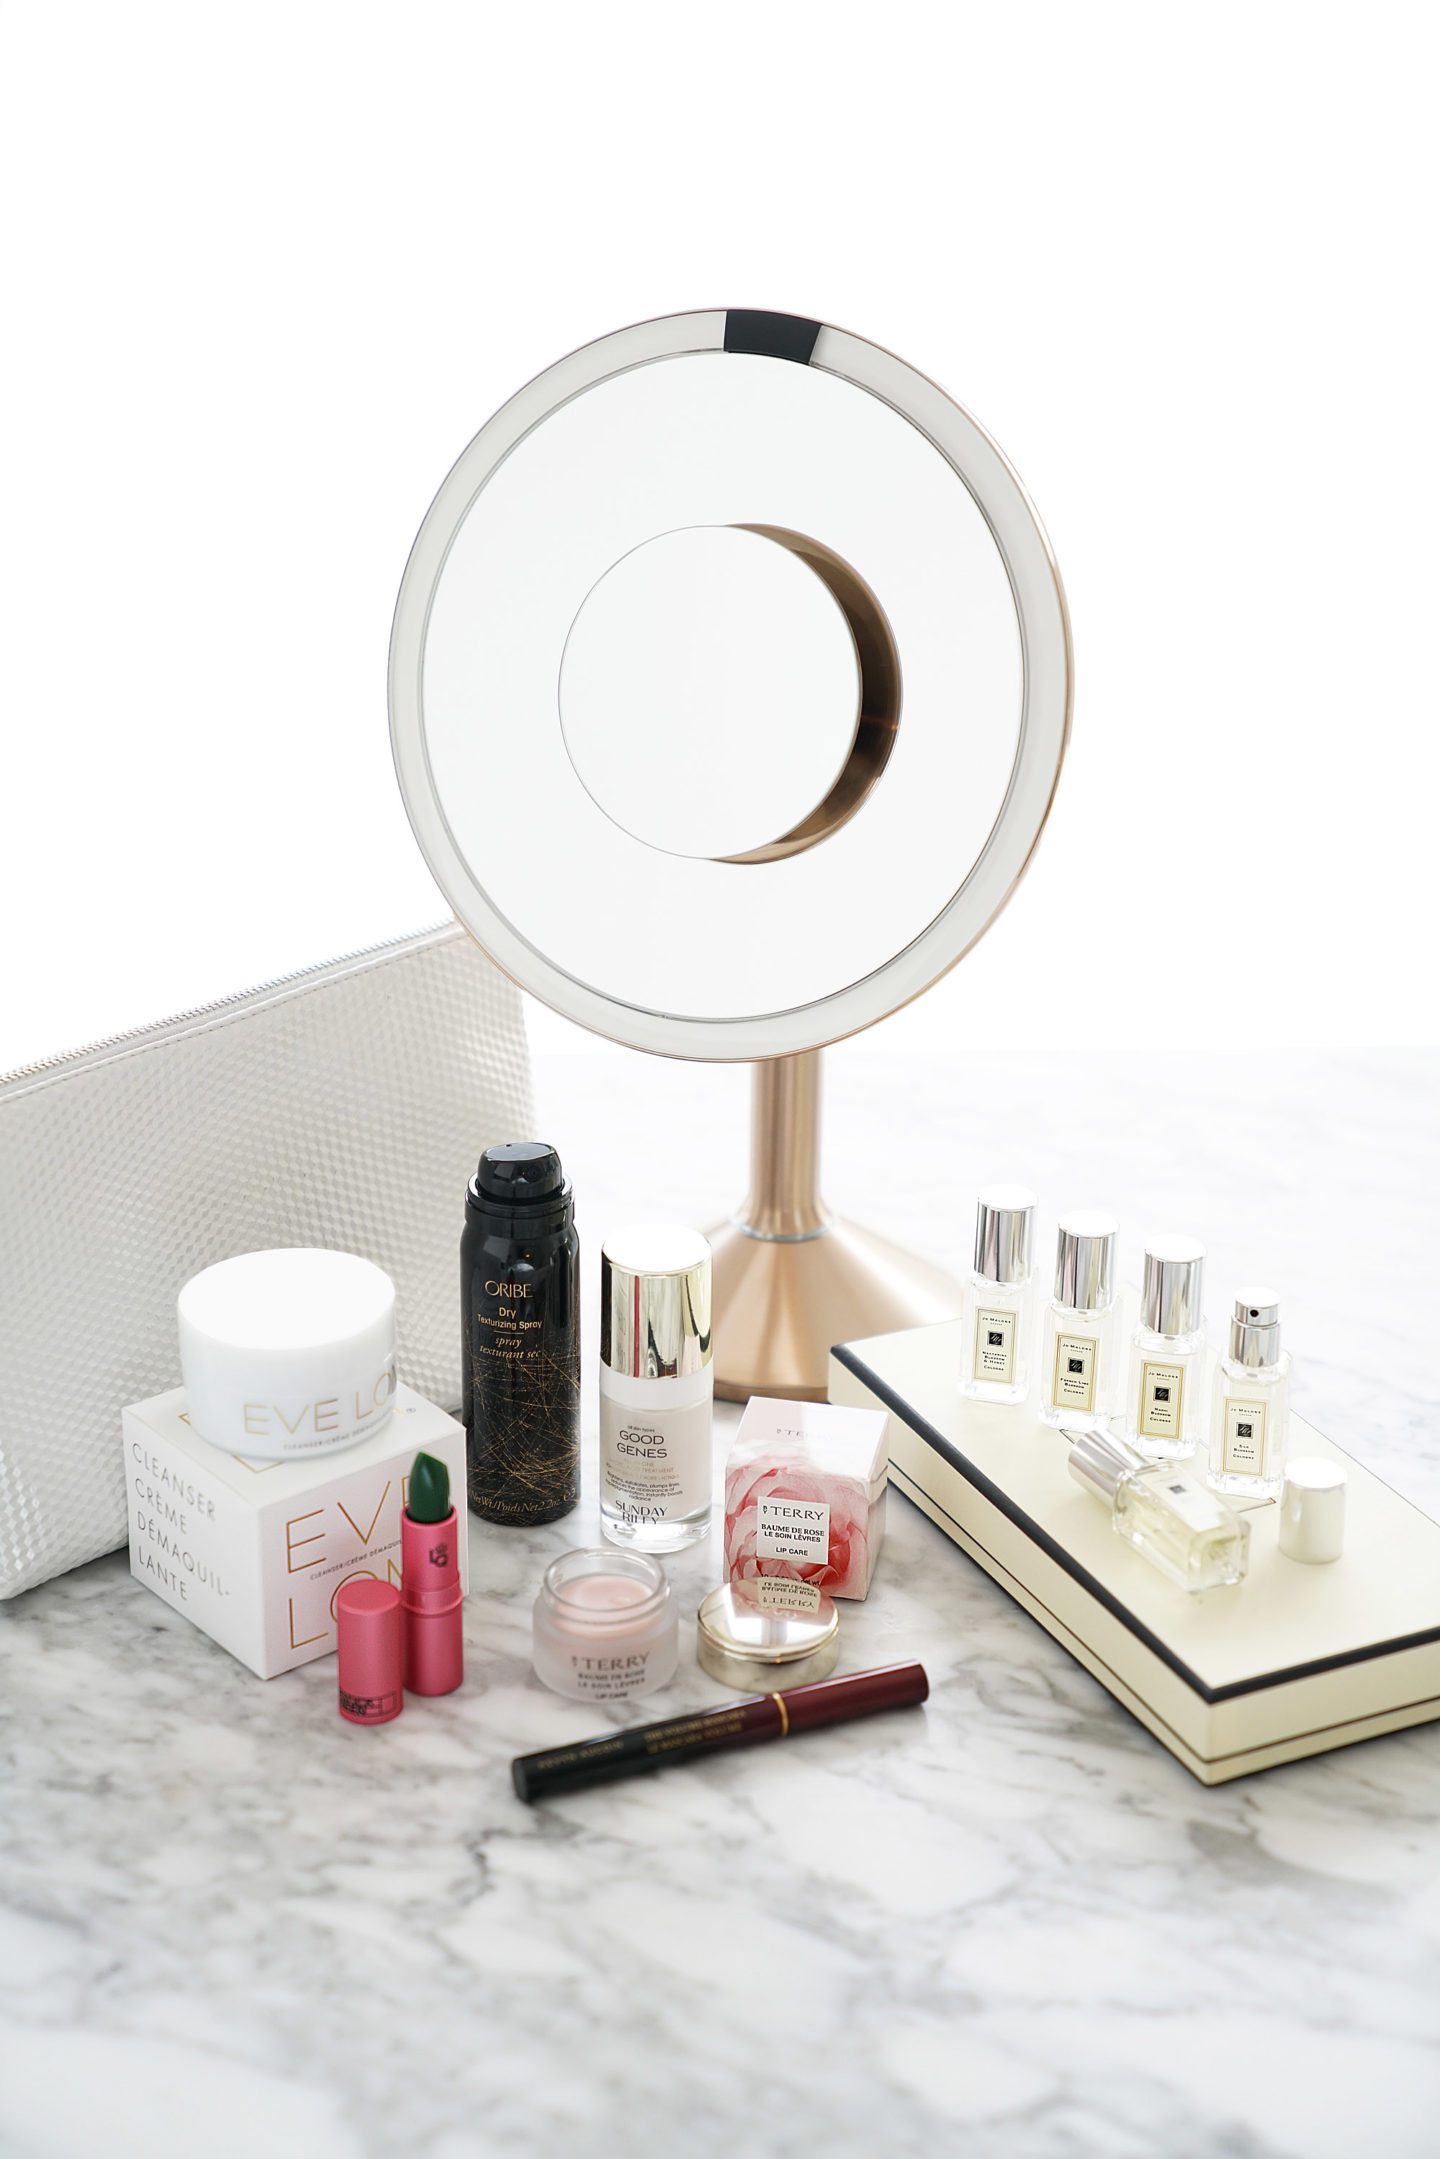 Nordstrom Anniversary Sale Beauty Exclusives simplehuman, SpaceNK, Jo Malone | The Beauty Look Book